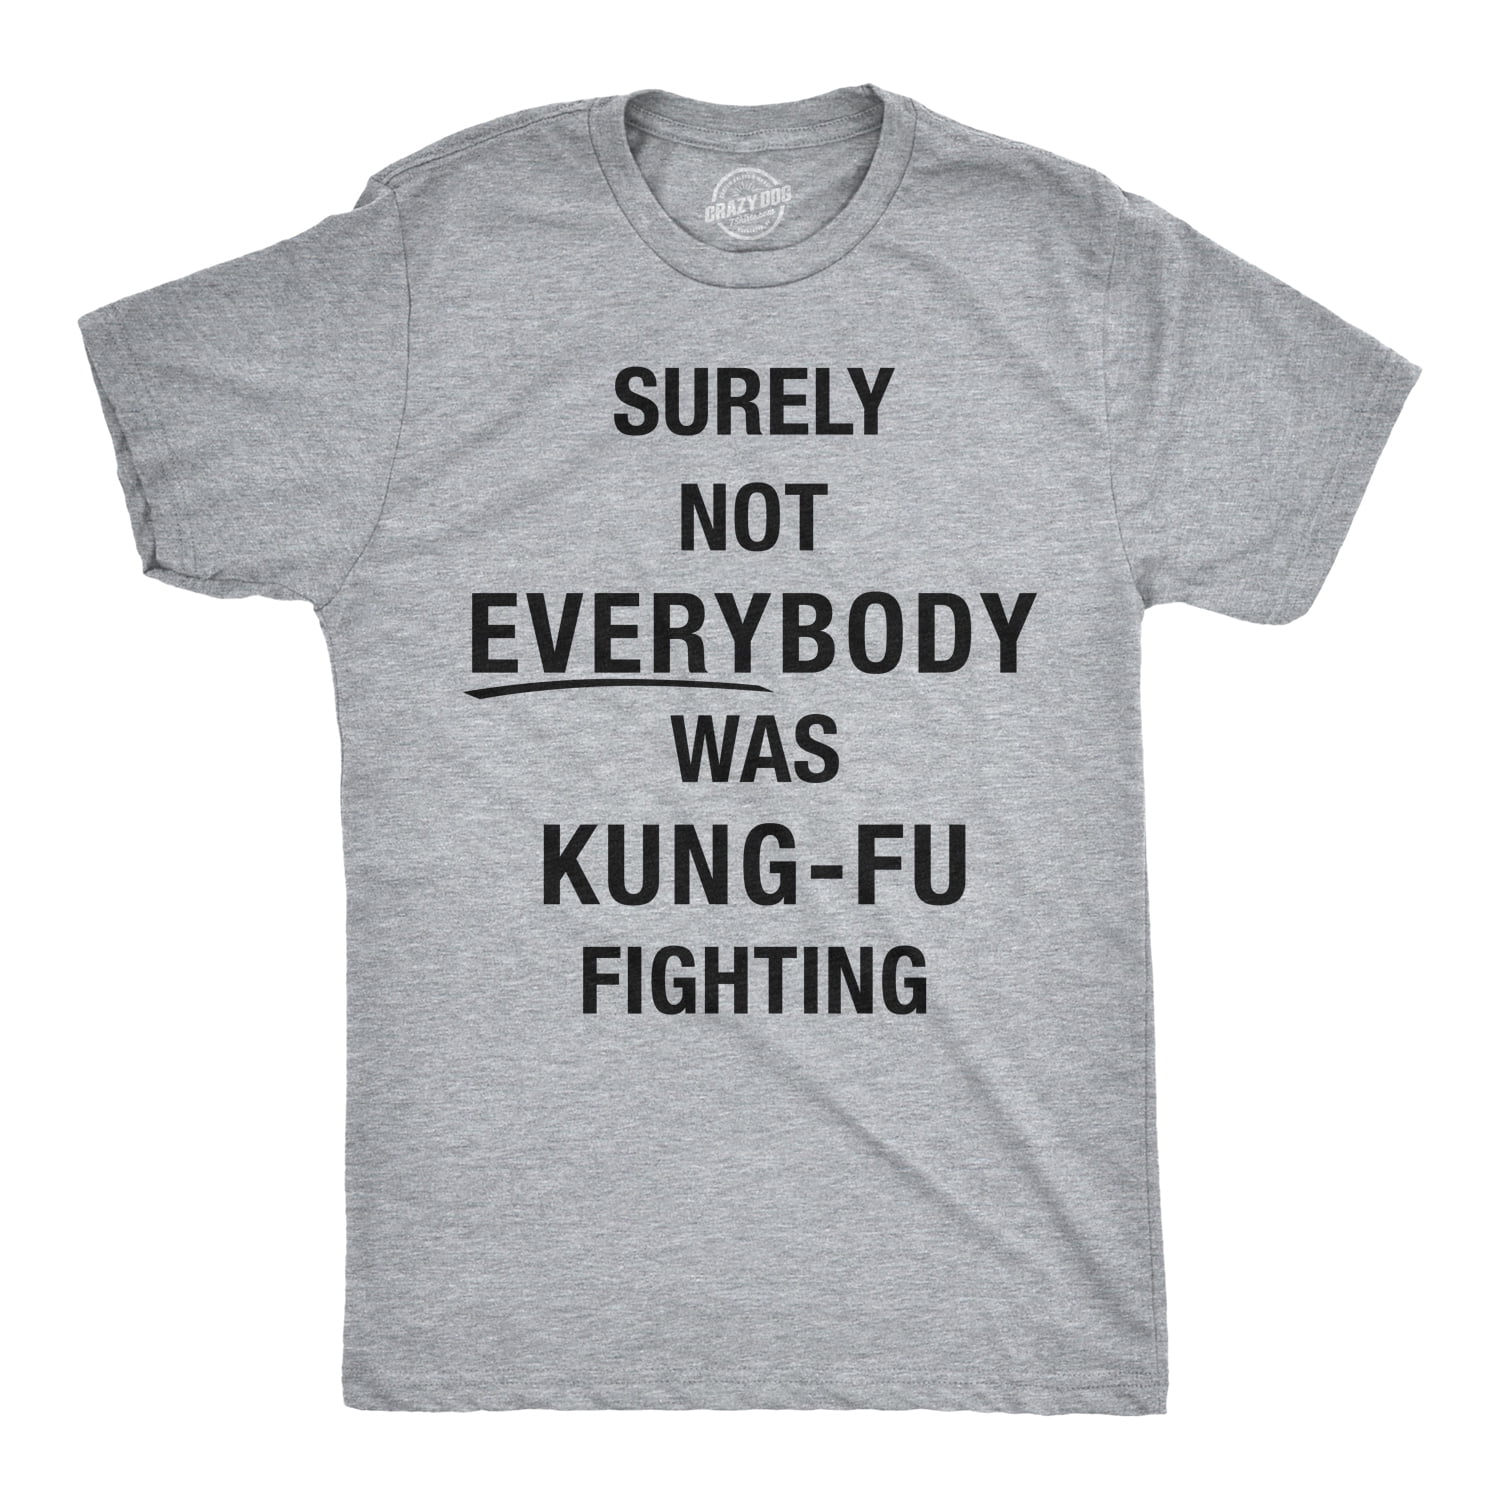 I Was Not Kung Fu Fighting T-Shirt funny saying 80s music sarcastic novelty humor Funny Tshirts for Men Cool Funny T Shirt Man Mens Shirt